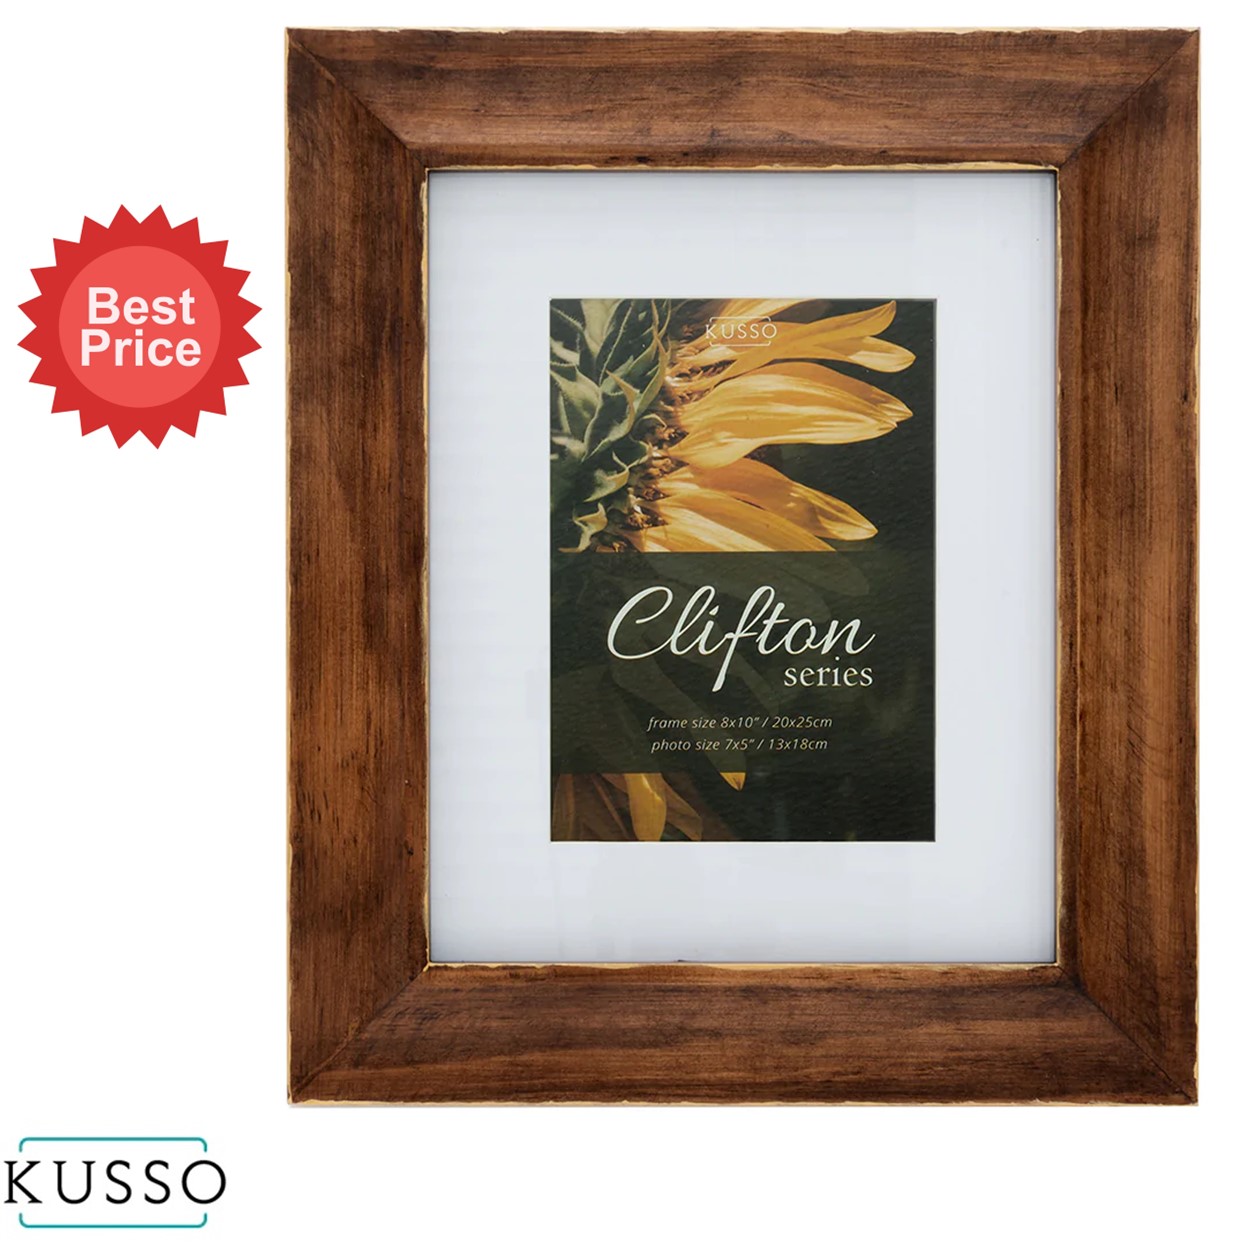 Kusso Clifton Frame 8x6